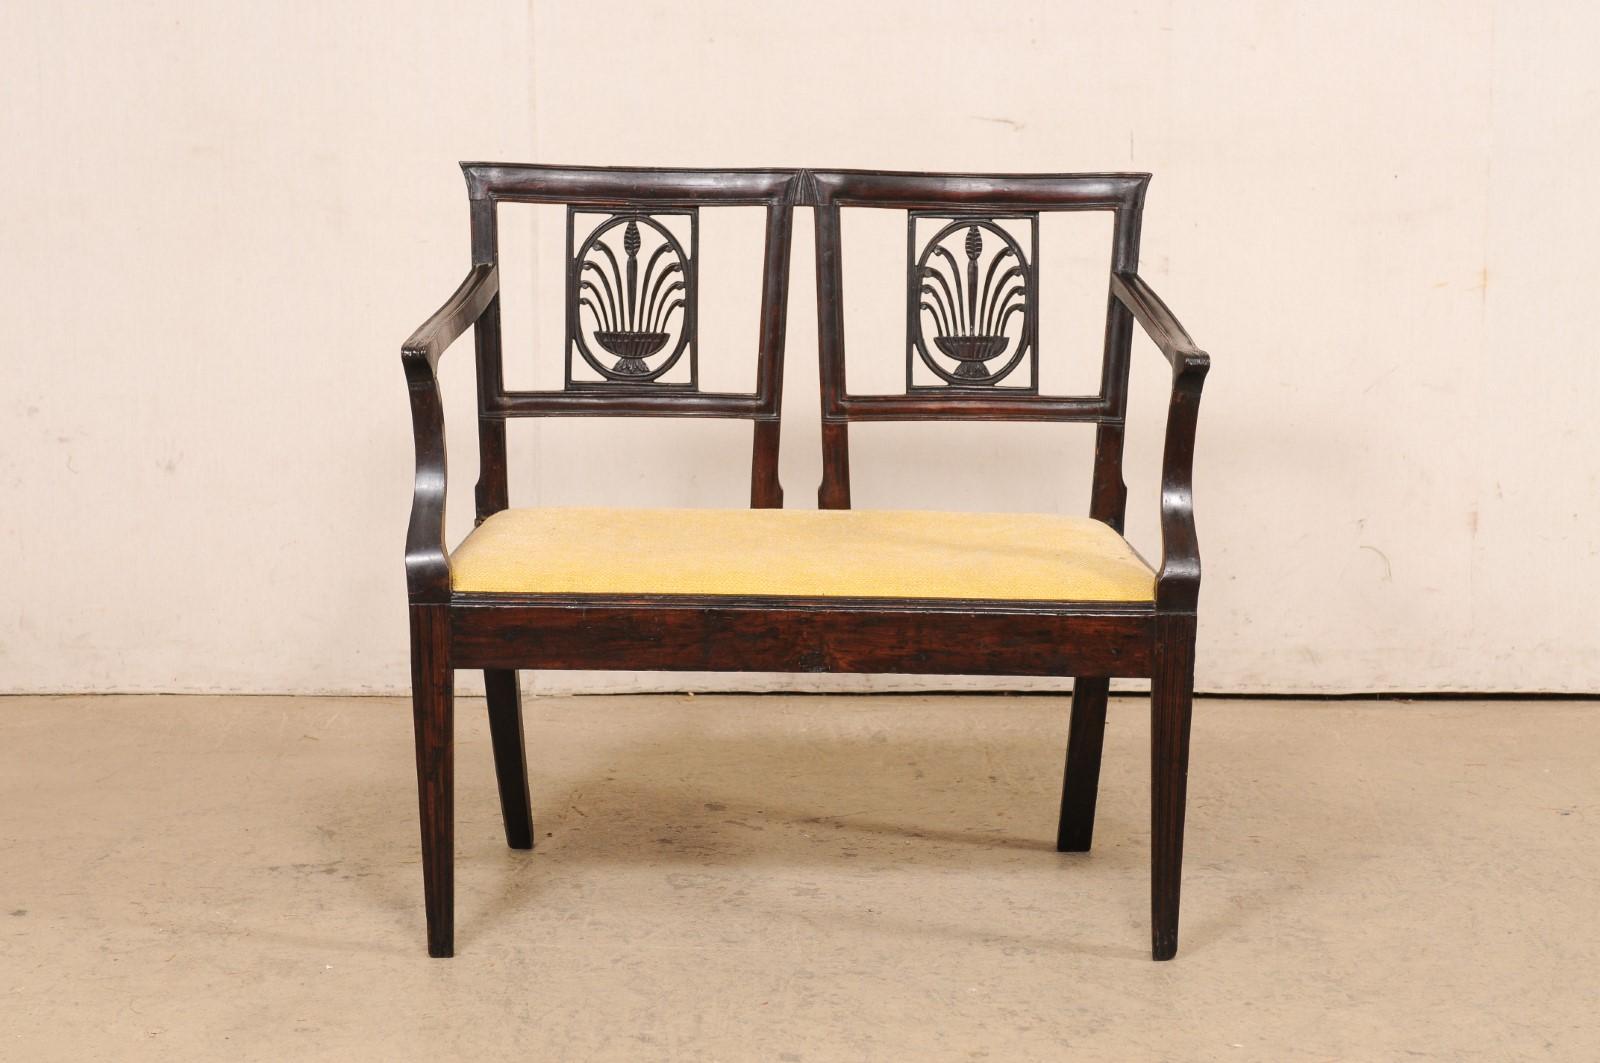 Italian Neoclassic Two-Seat Chair Settee, Late 18th C. For Sale 6